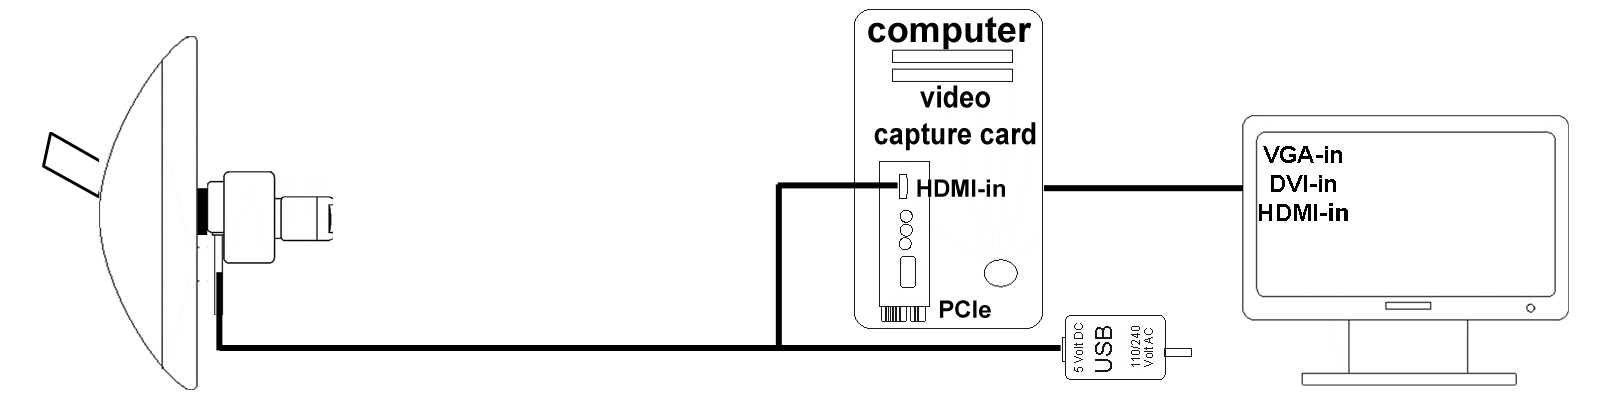 diagram thirdeye uni with computer and capture card